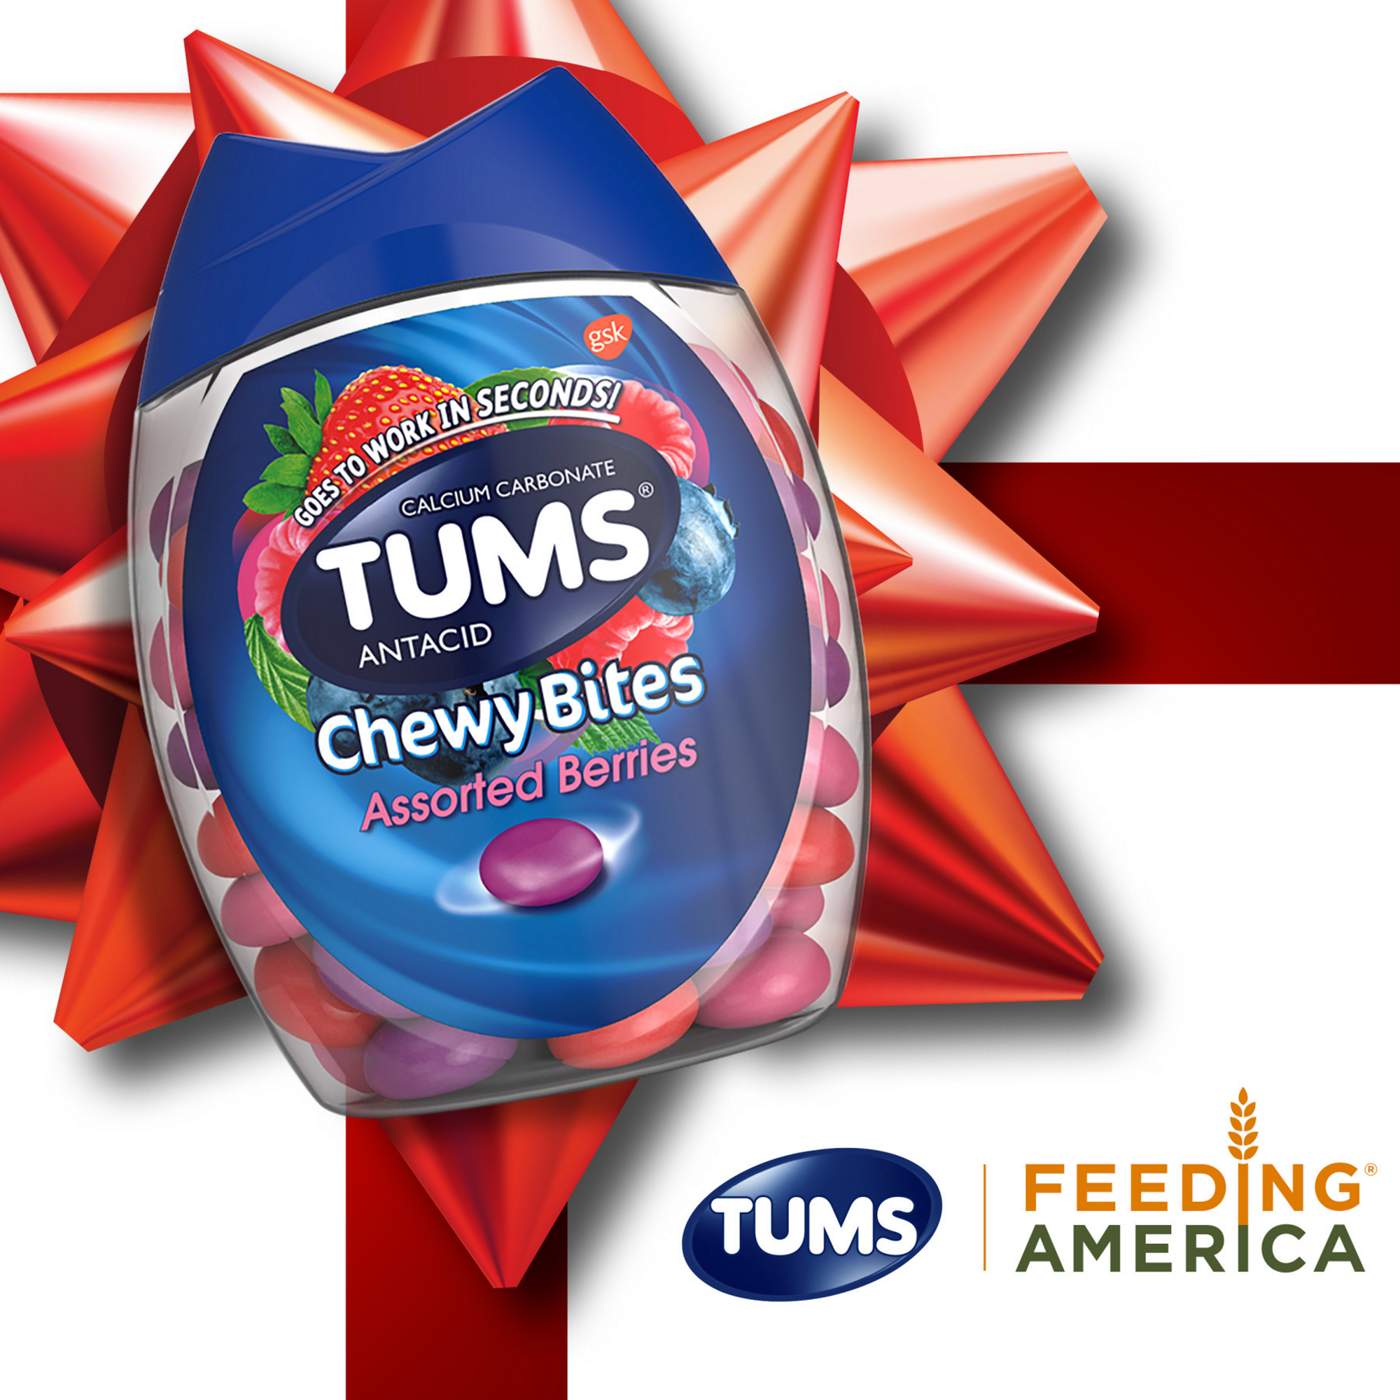 Tums Chewy Bites Assorted Berries Antacid Tablets; image 4 of 8